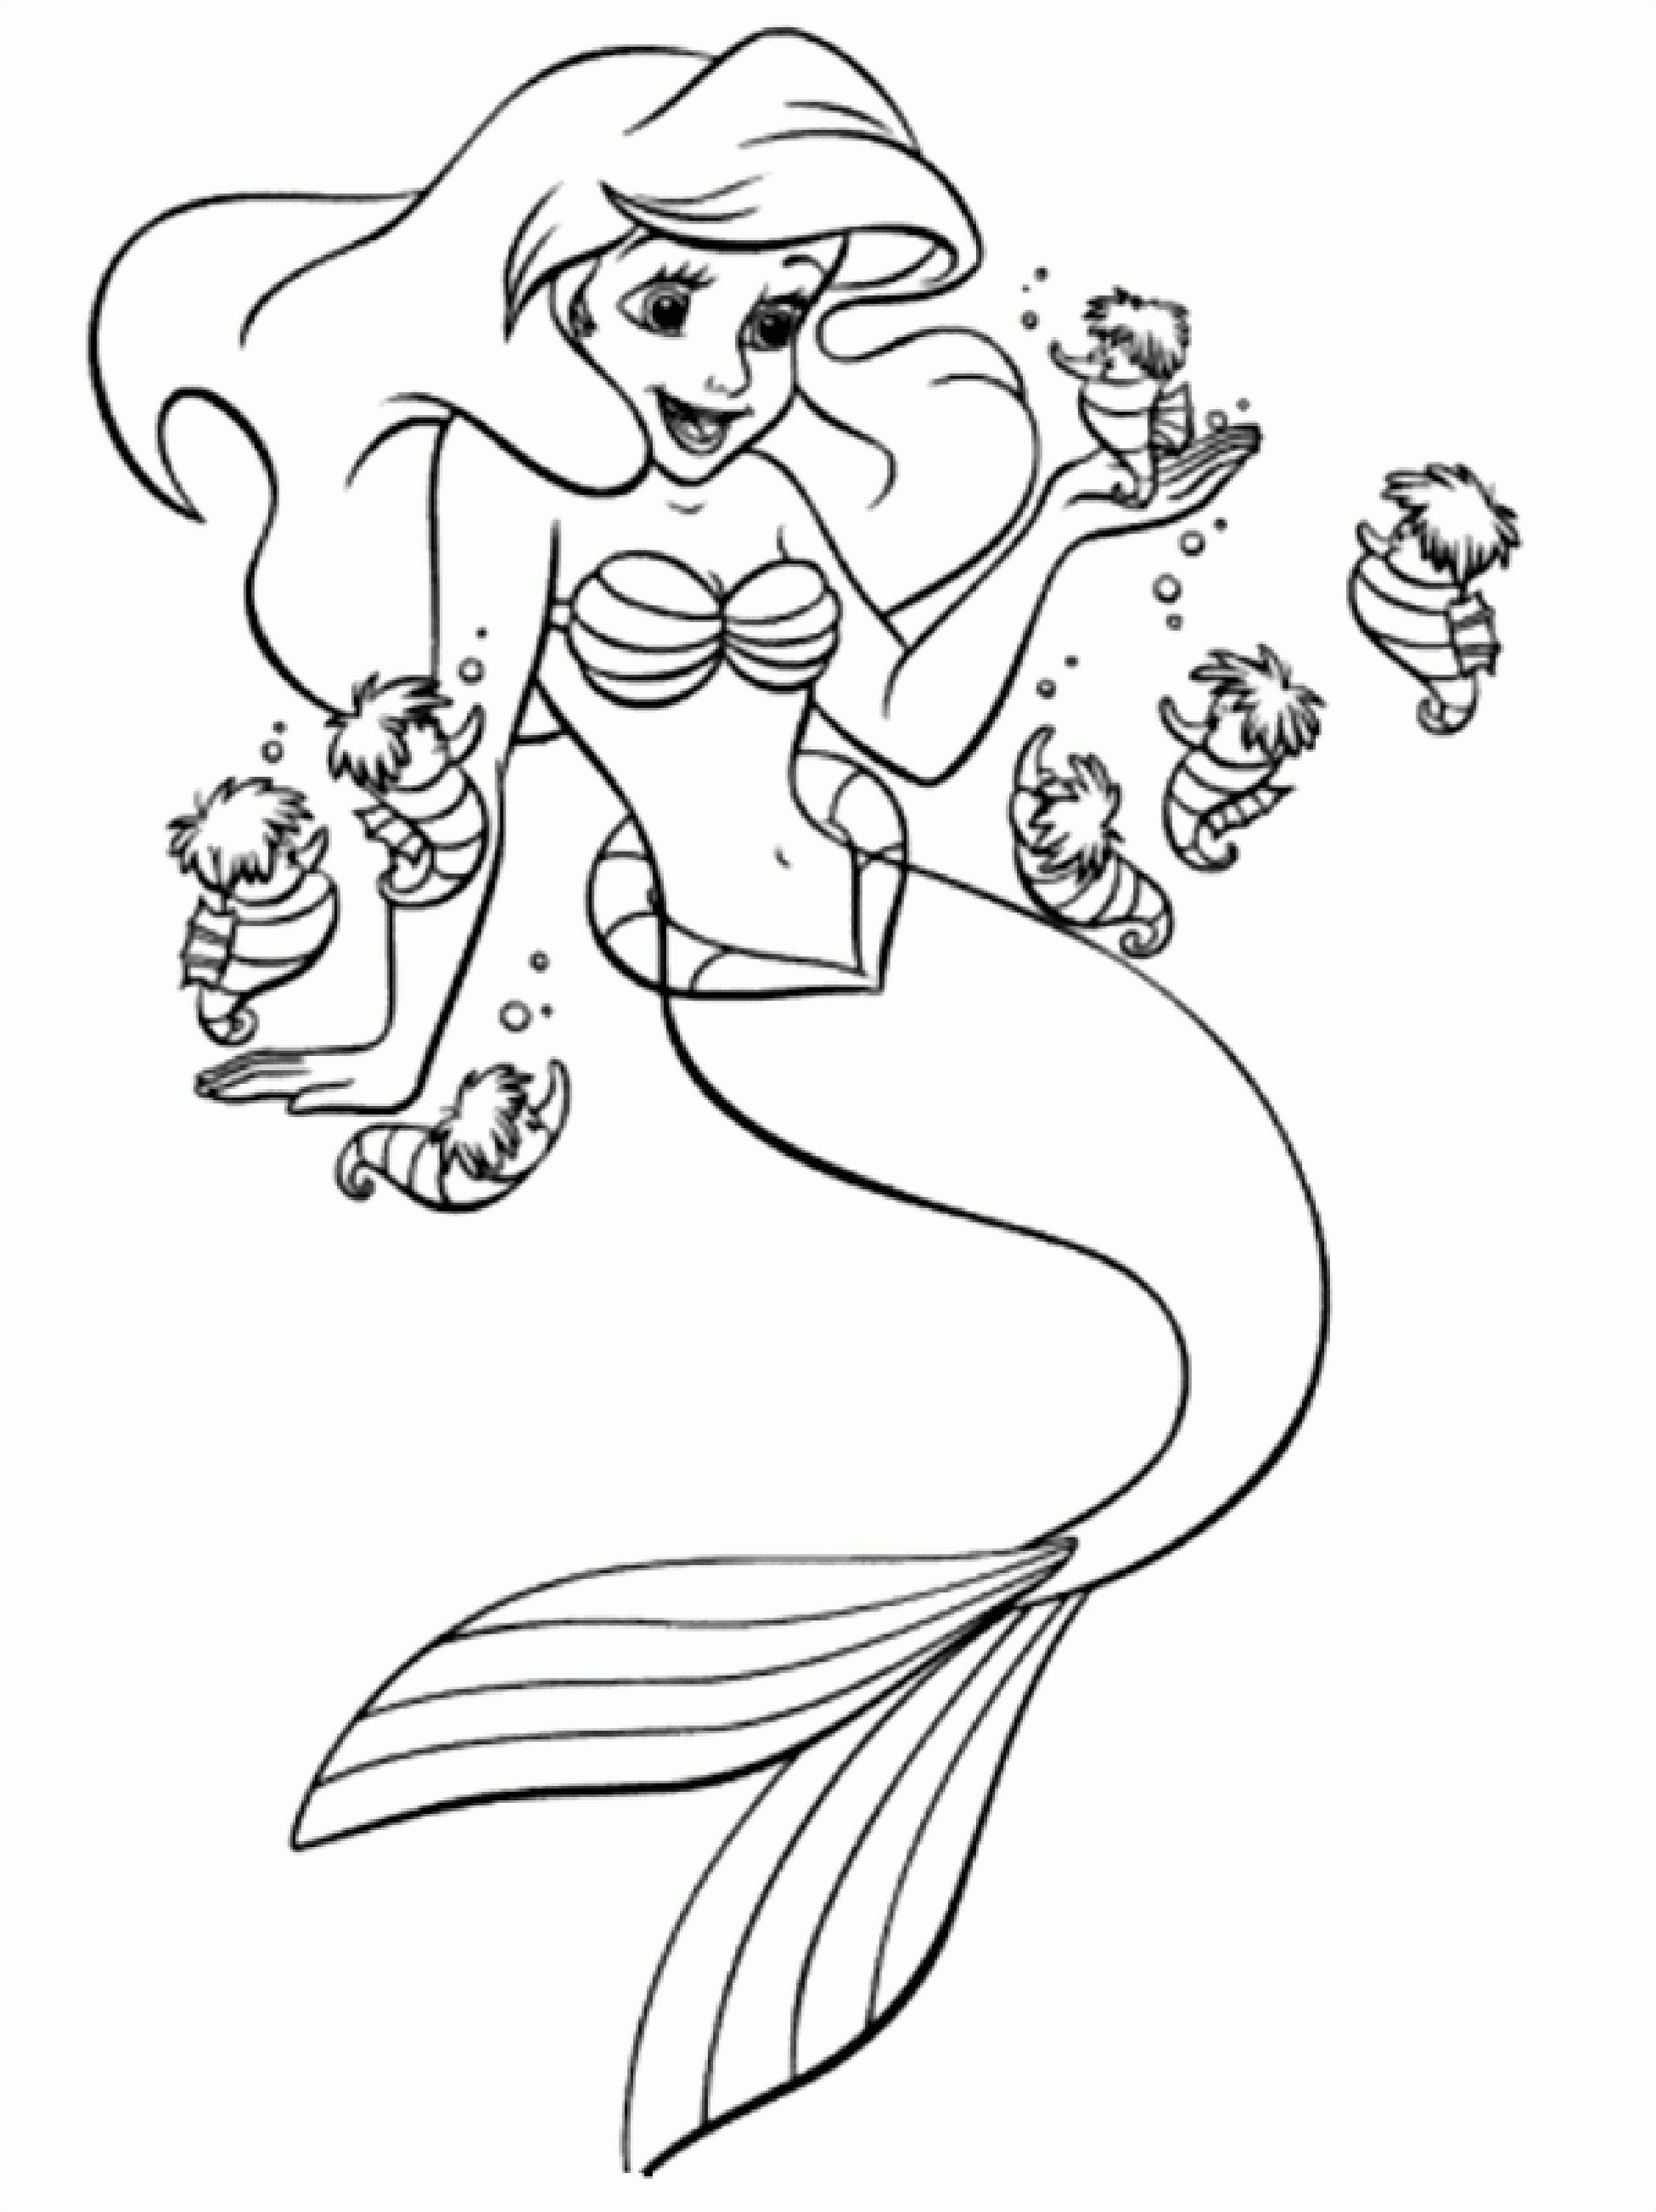 Coloring Pages for Kids to Print Disney